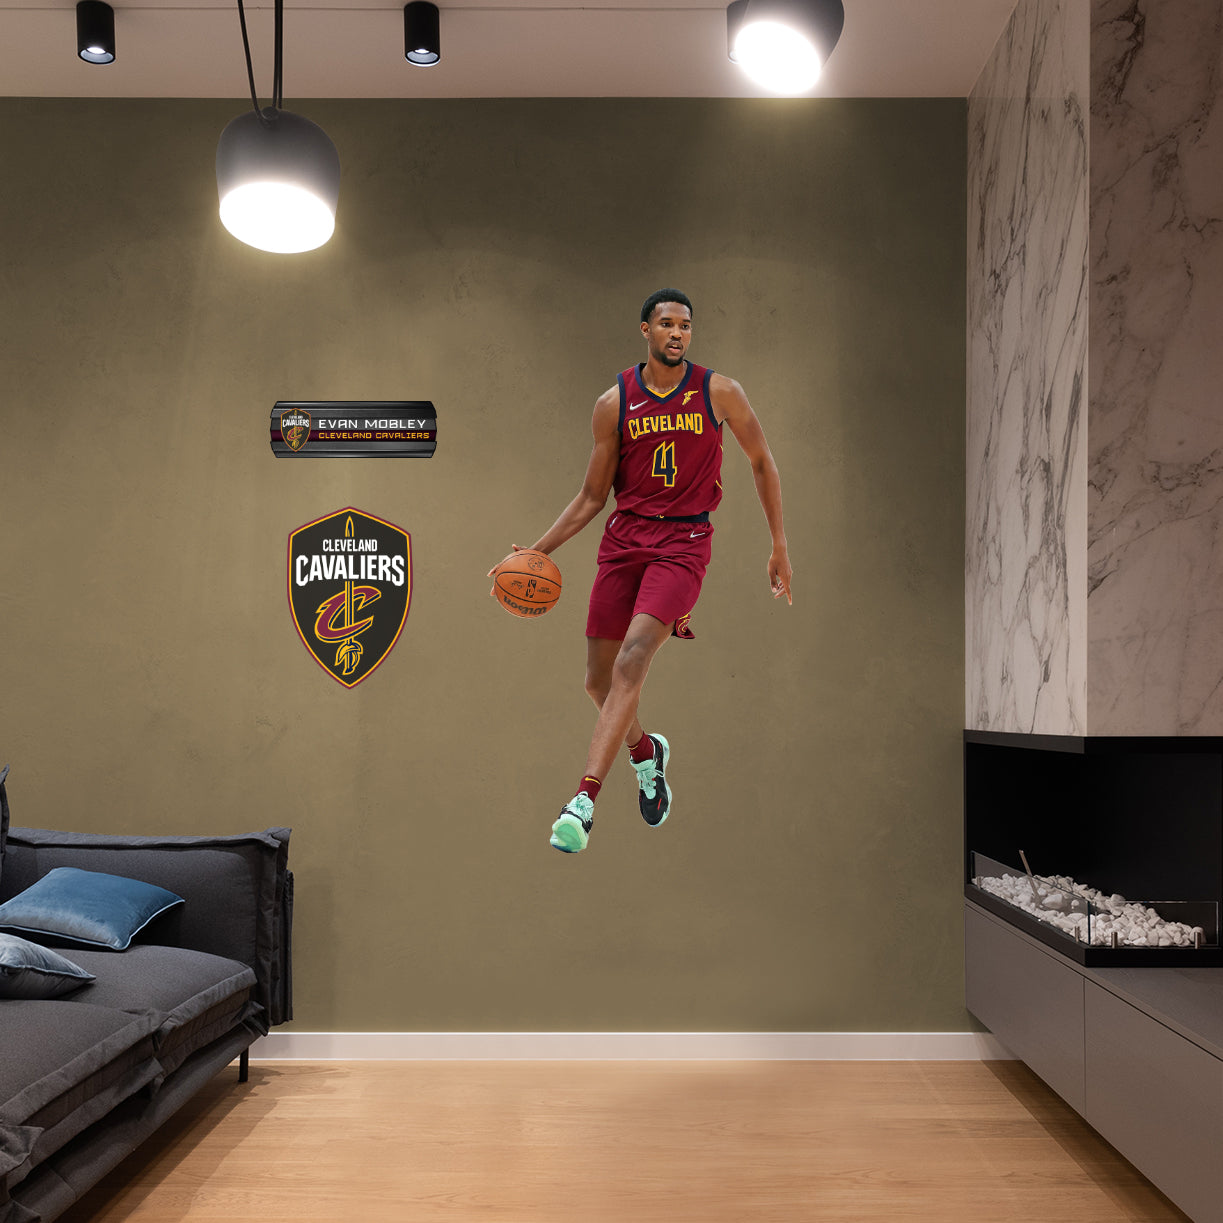 Cleveland Cavaliers: Evan Mobley - Officially Licensed NBA Removable Adhesive Decal